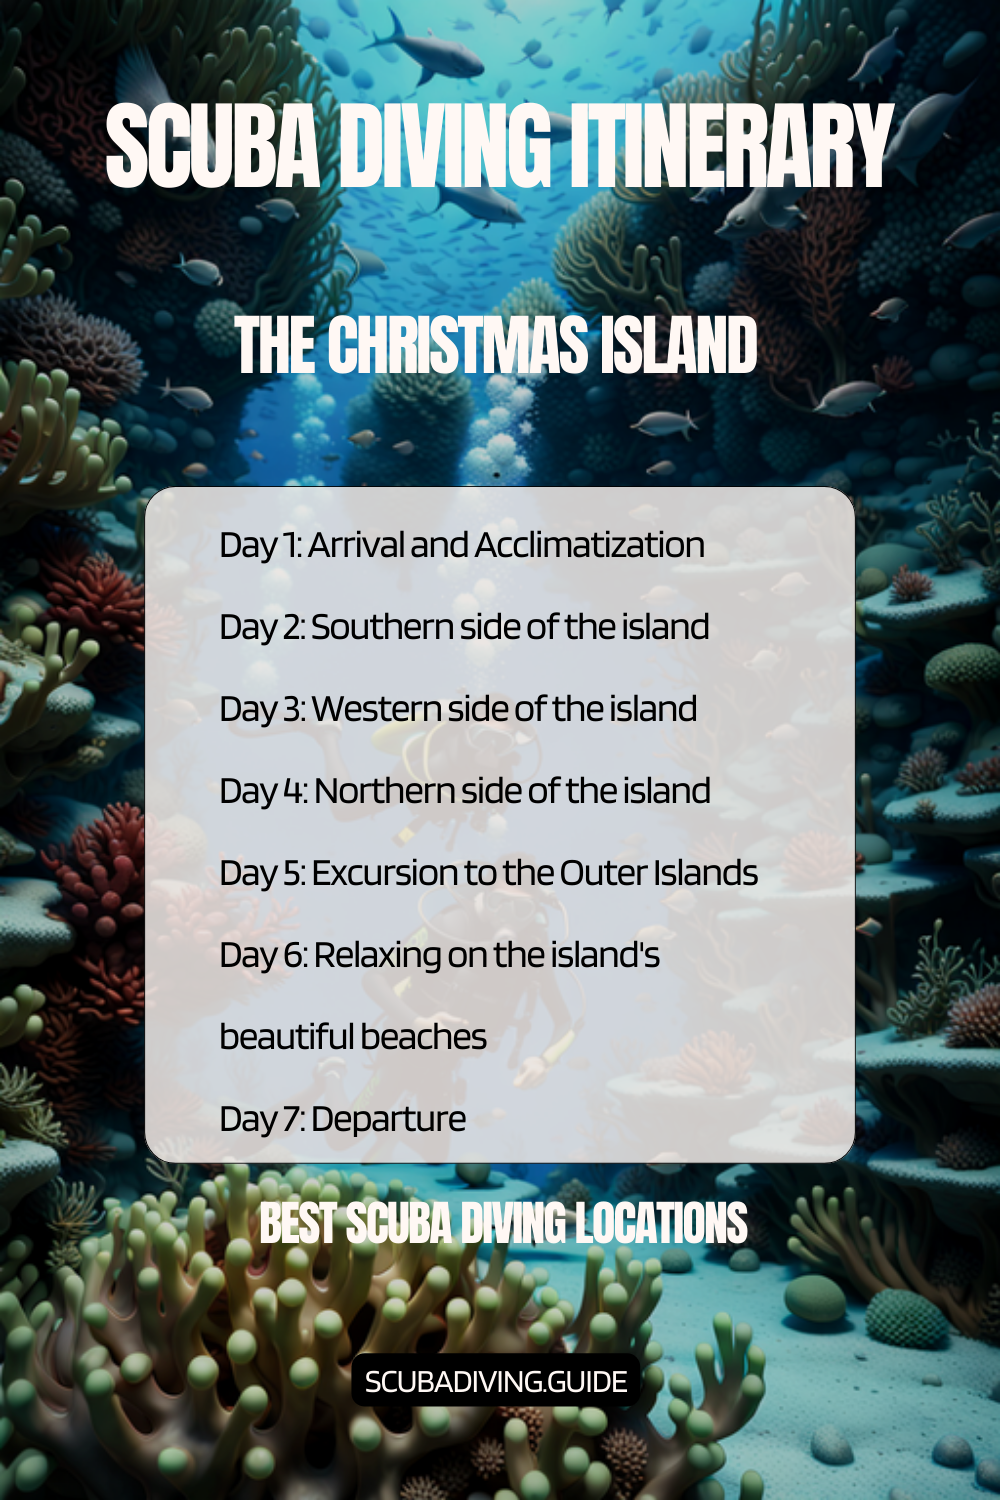 The Christmas Island Recommended Scuba Diving Itinerary